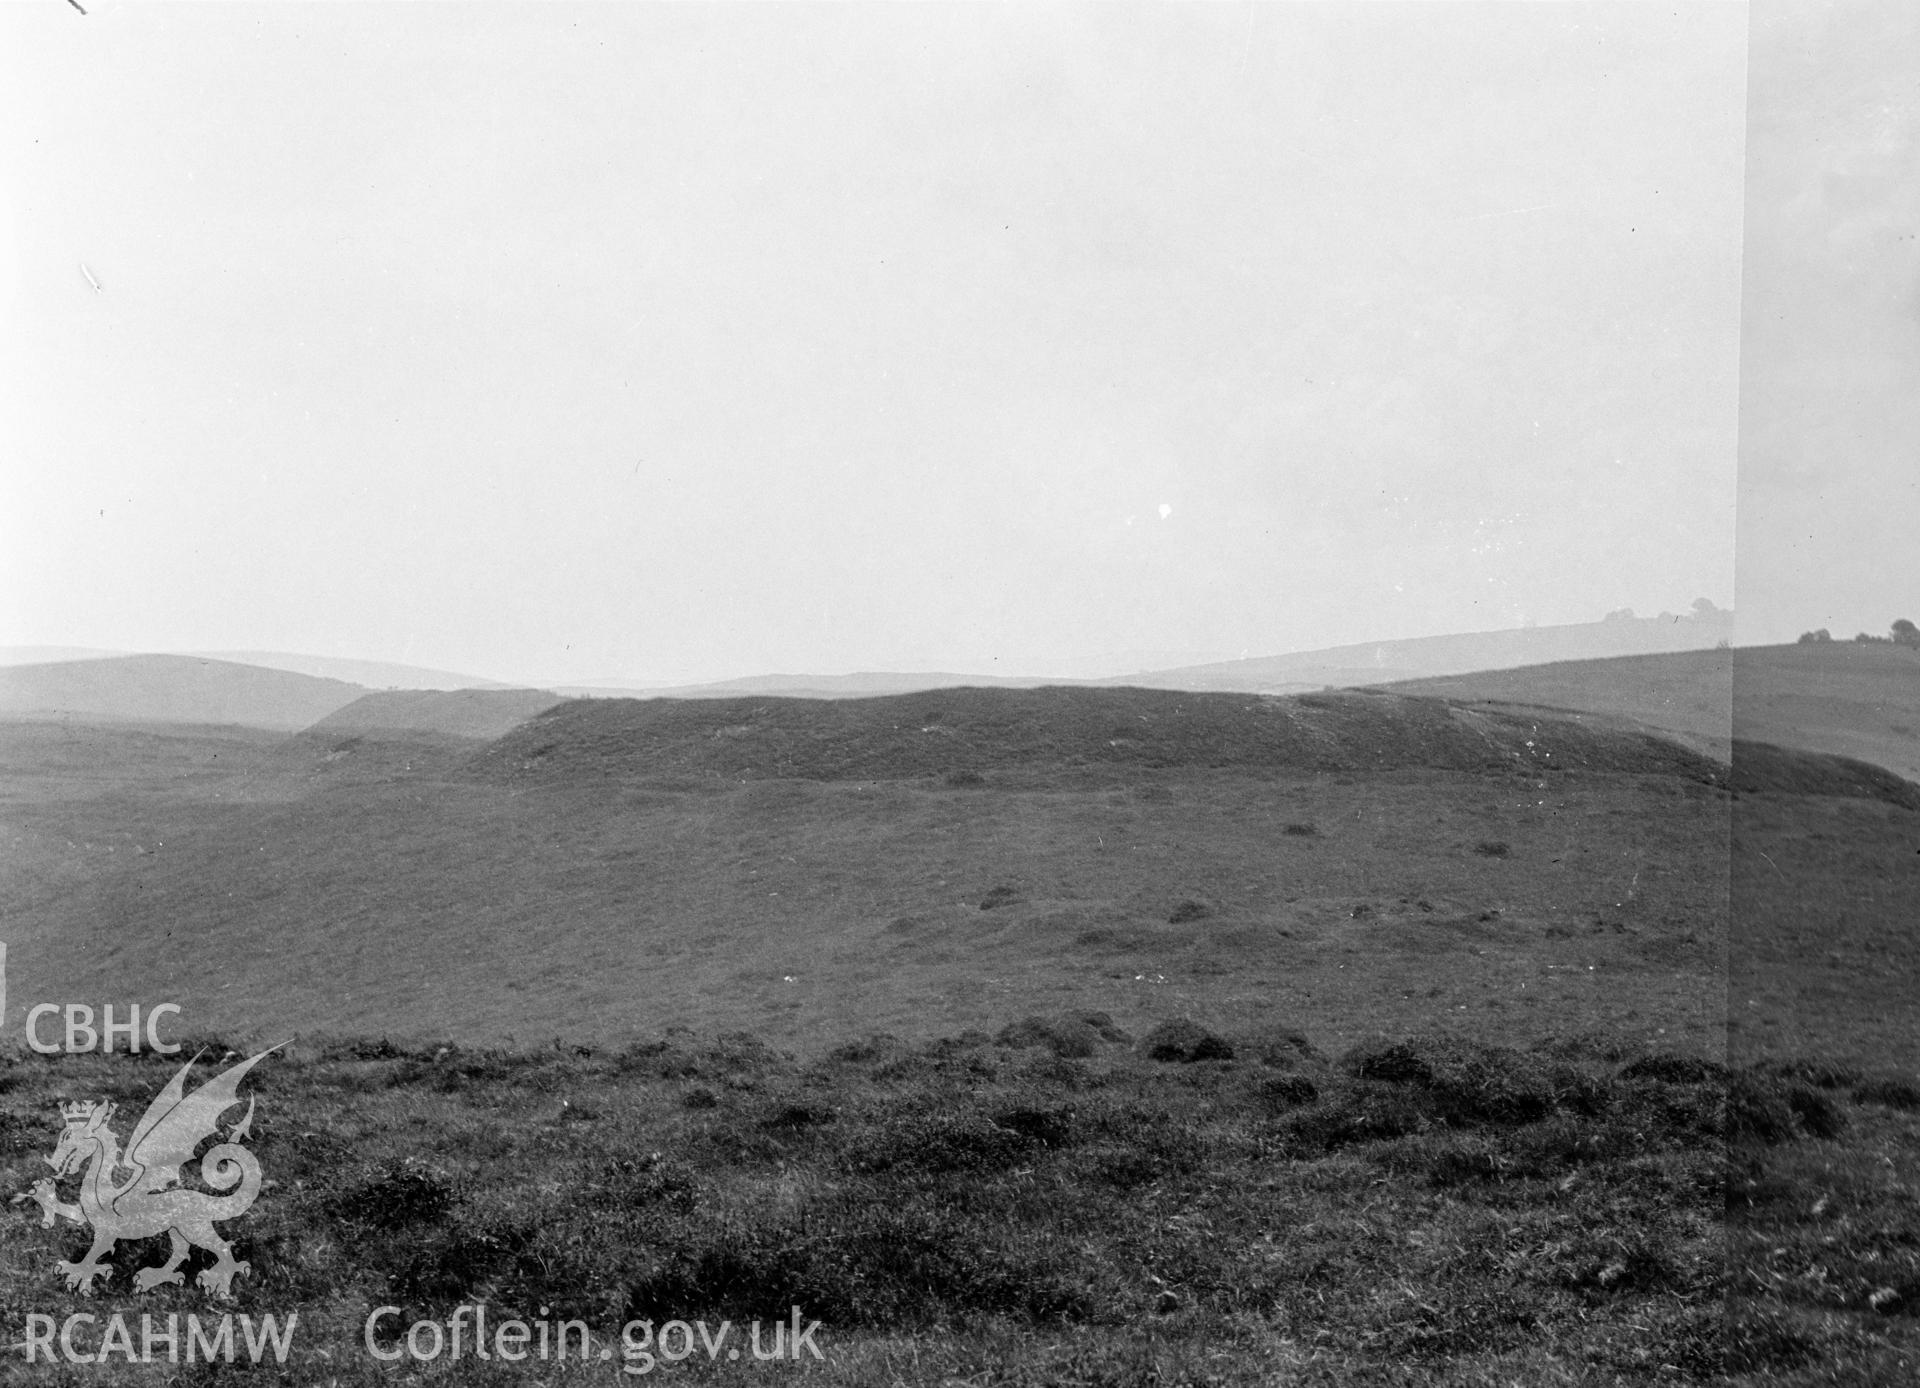 Digital copy of a nitrate negative showing view of Castell y Blaidd.